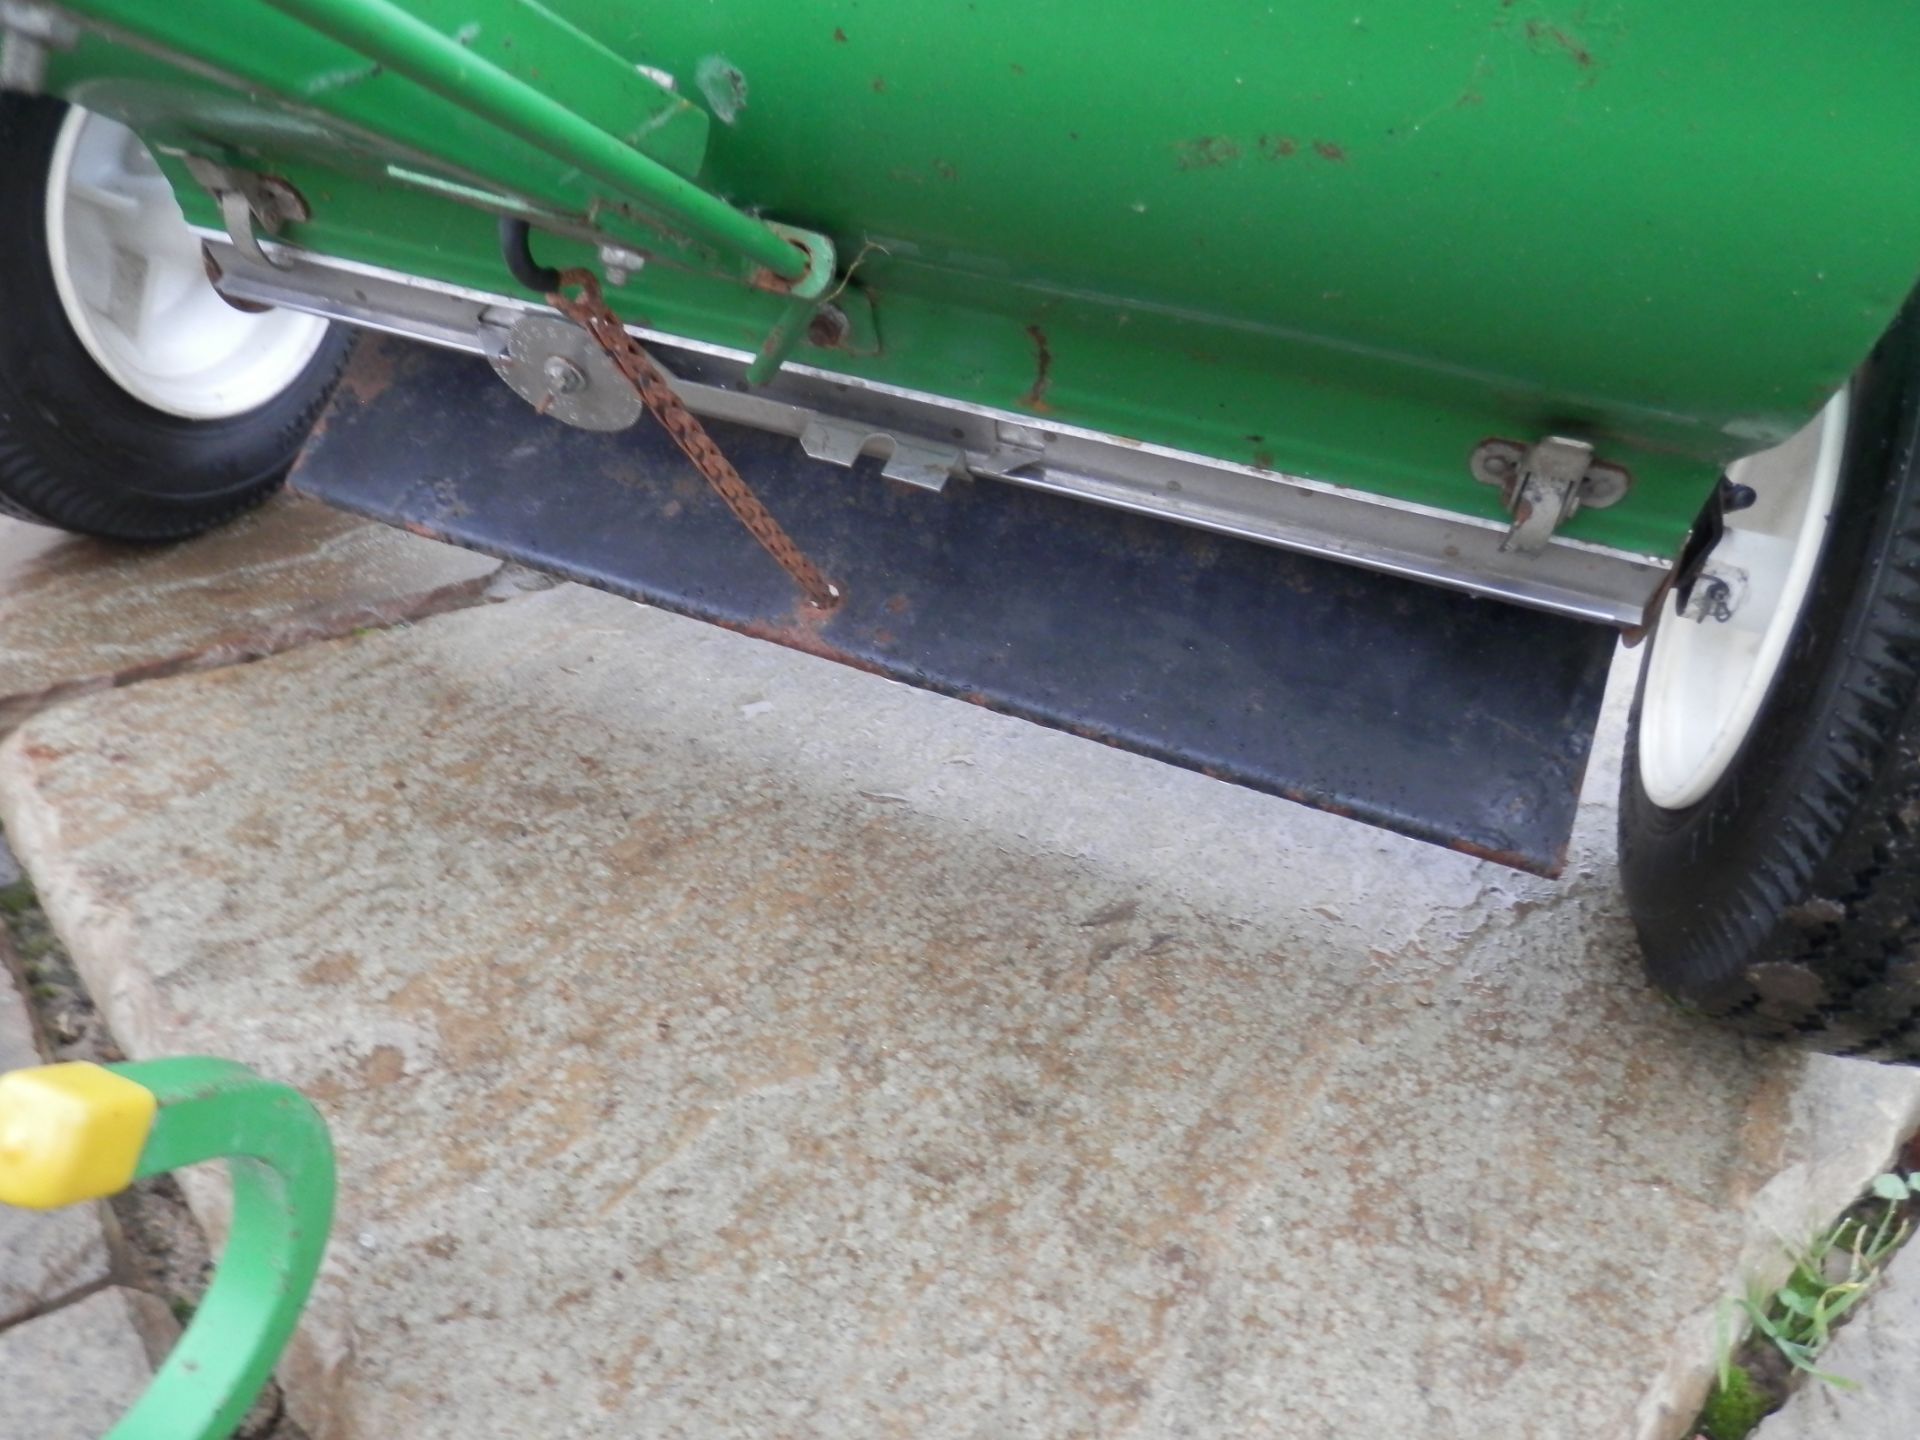 GOOD WORKING GANDY BLEC HAND PUSH SEED/GRAIN SPREADER - Image 6 of 6